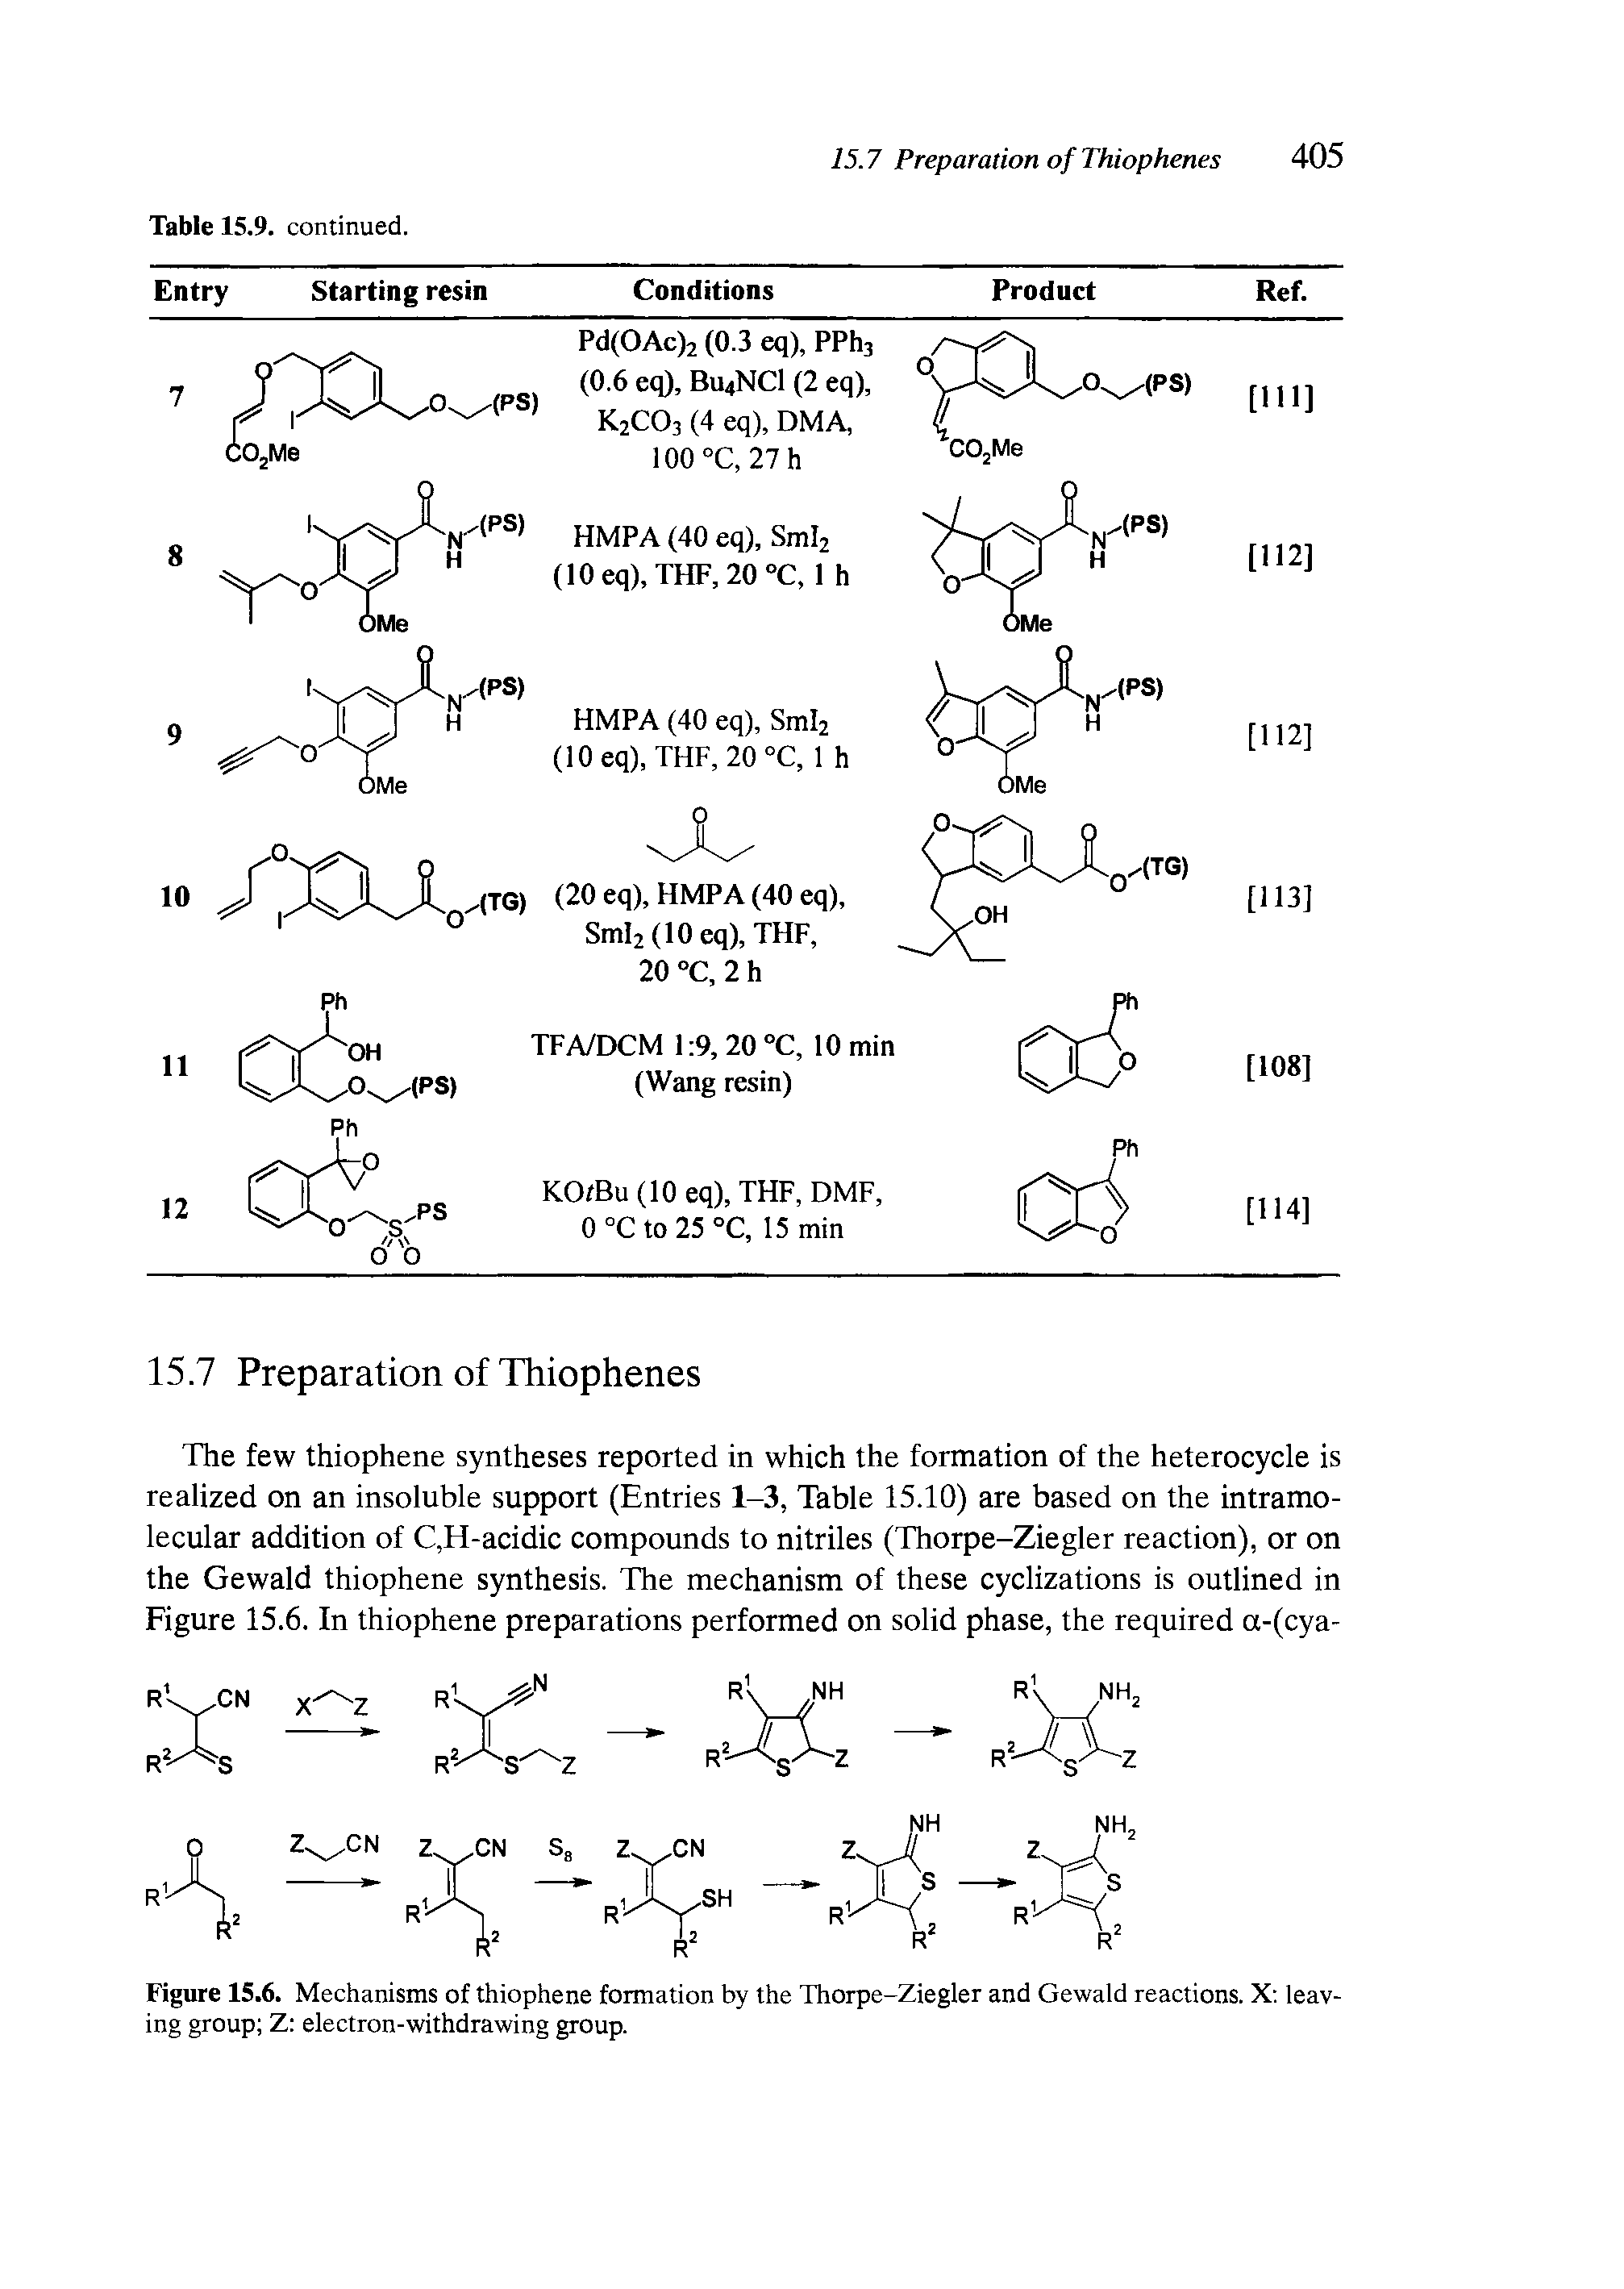 Figure 15.6. Mechanisms of thiophene formation by the Thorpe-Ziegler and Gewald reactions. X leaving group Z electron-withdrawing group.